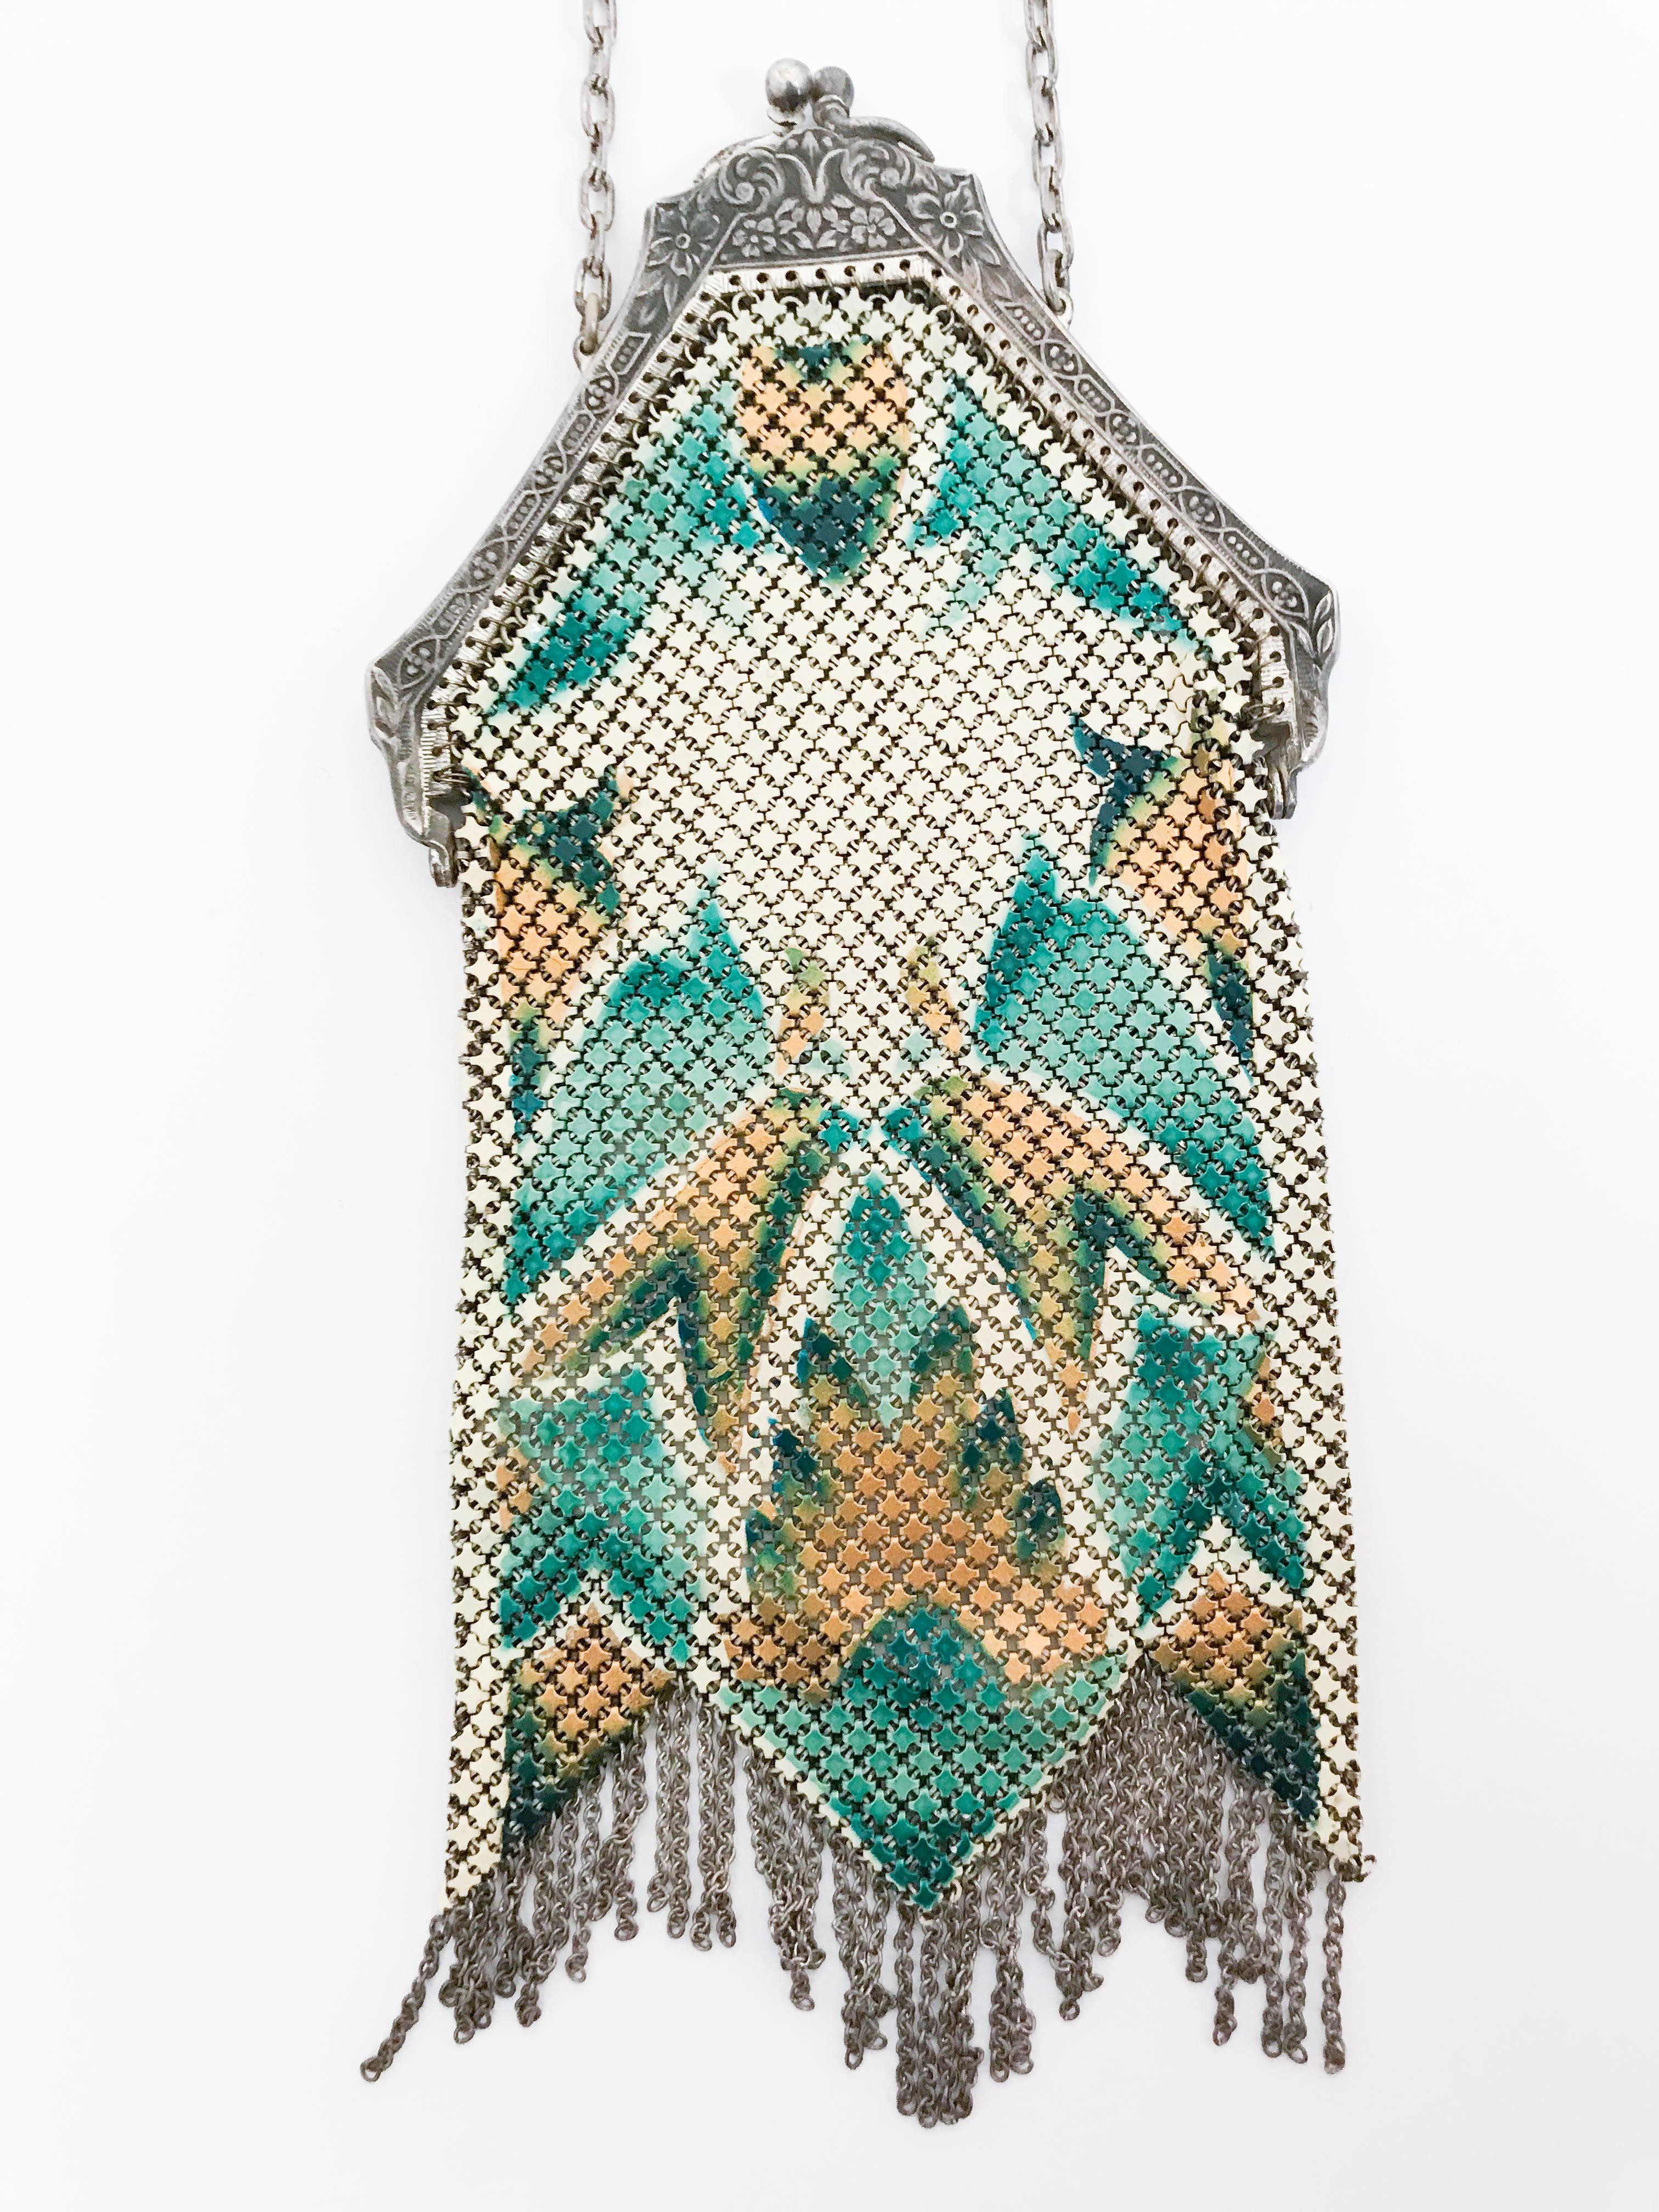 1920s Mandalian Metal Hand Painted Linked Purse. Metal linked purse with multi-toned green and gold hand painting and chain fringe. 